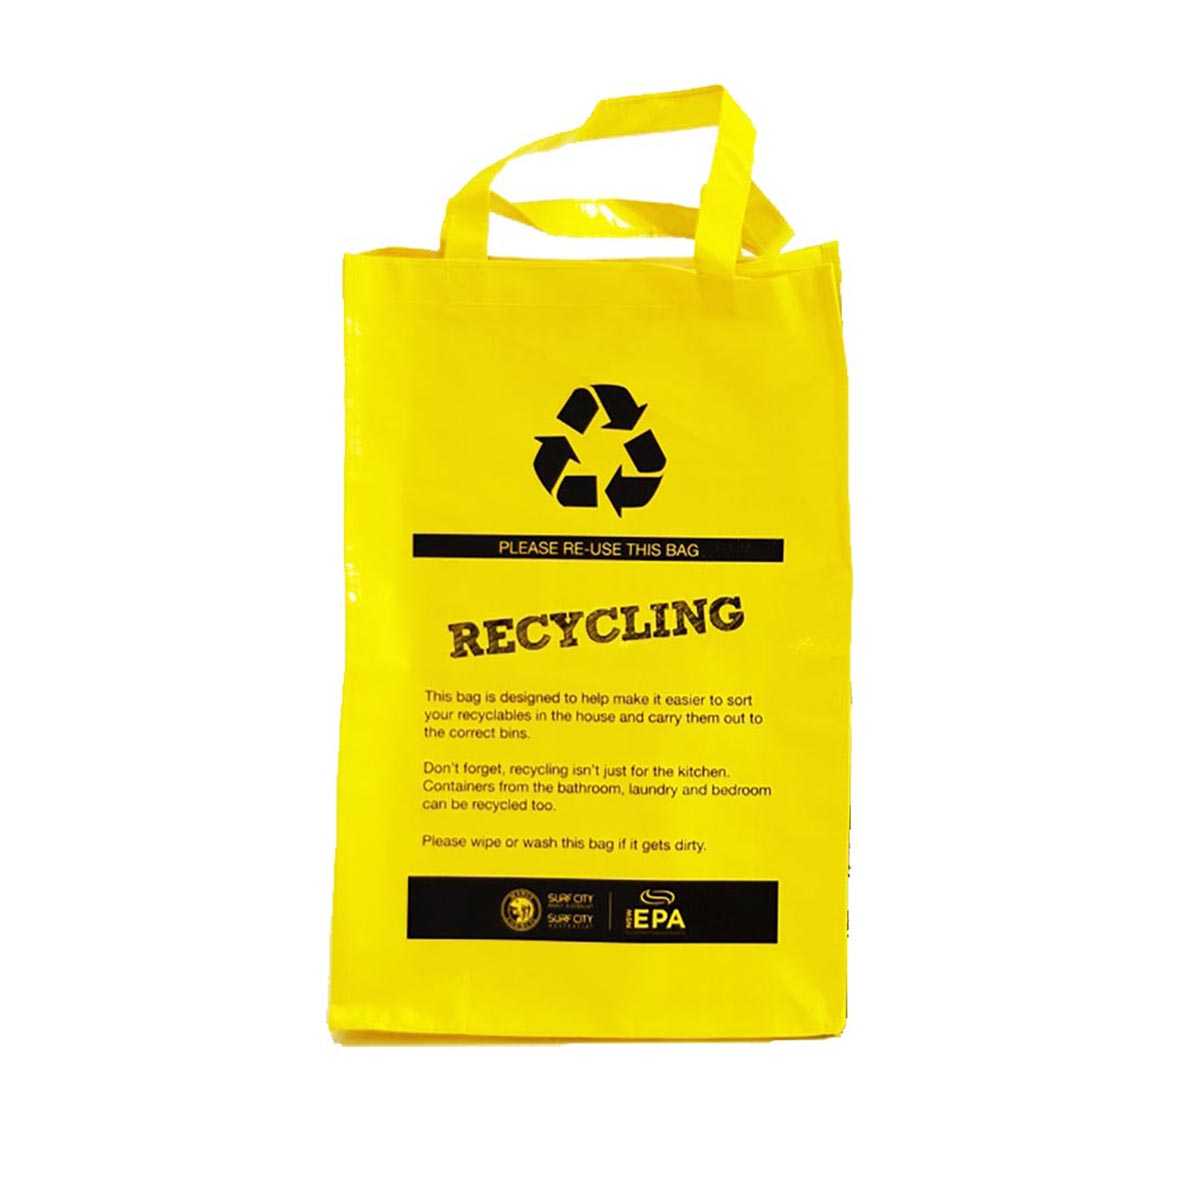 4 Silverline Recycling Bags 40x32x32cm Green Colour-Coded Waterproof Tear-Proof 